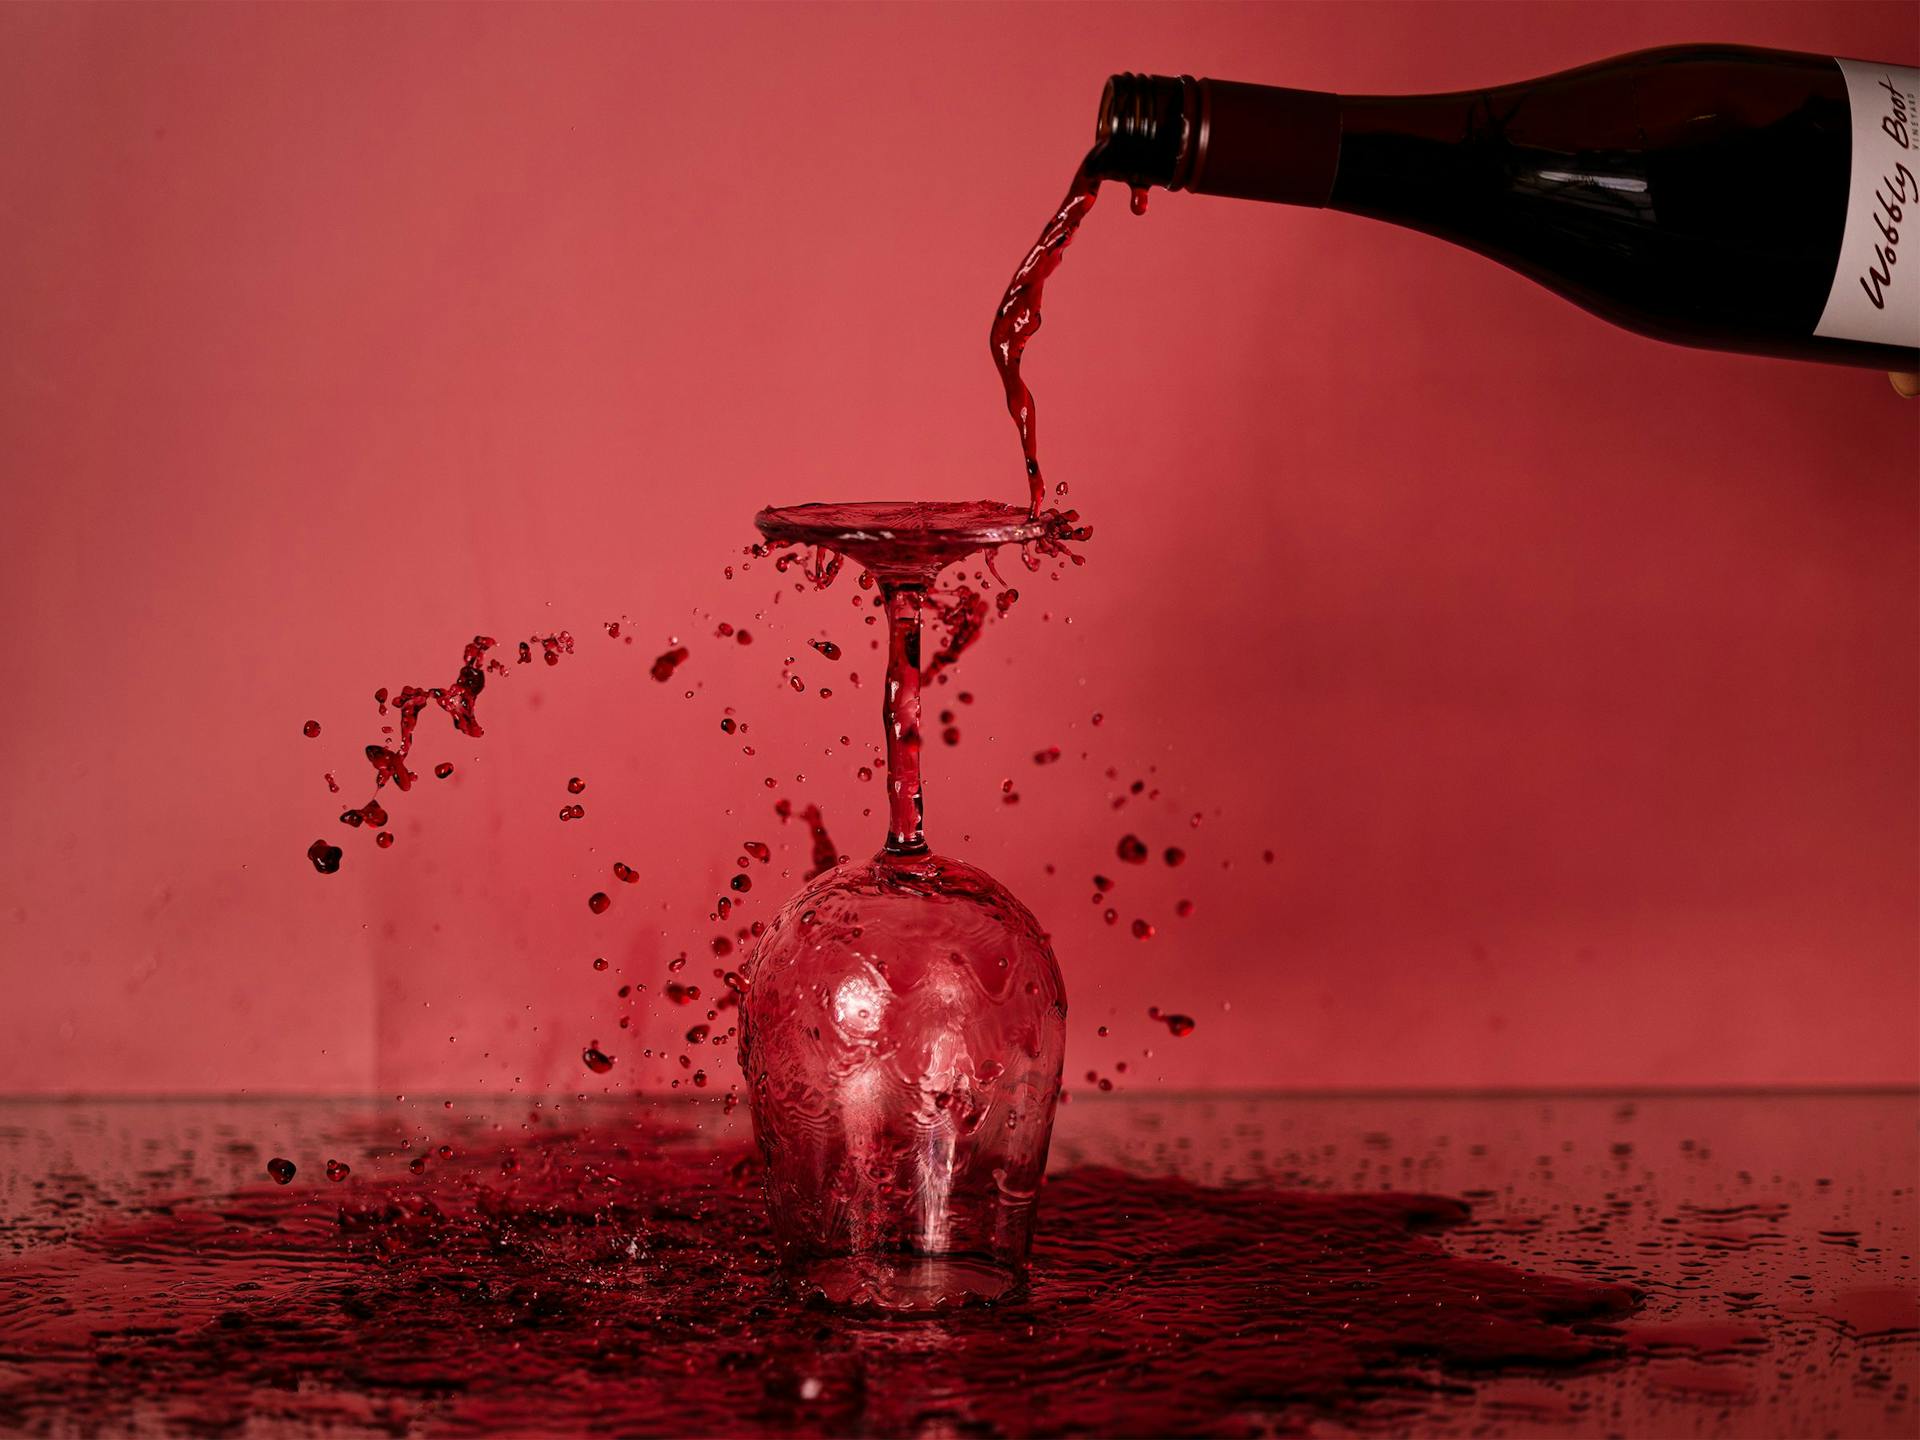 Red wine being poured onto an upside-down glass, creating a pool of wine on the table